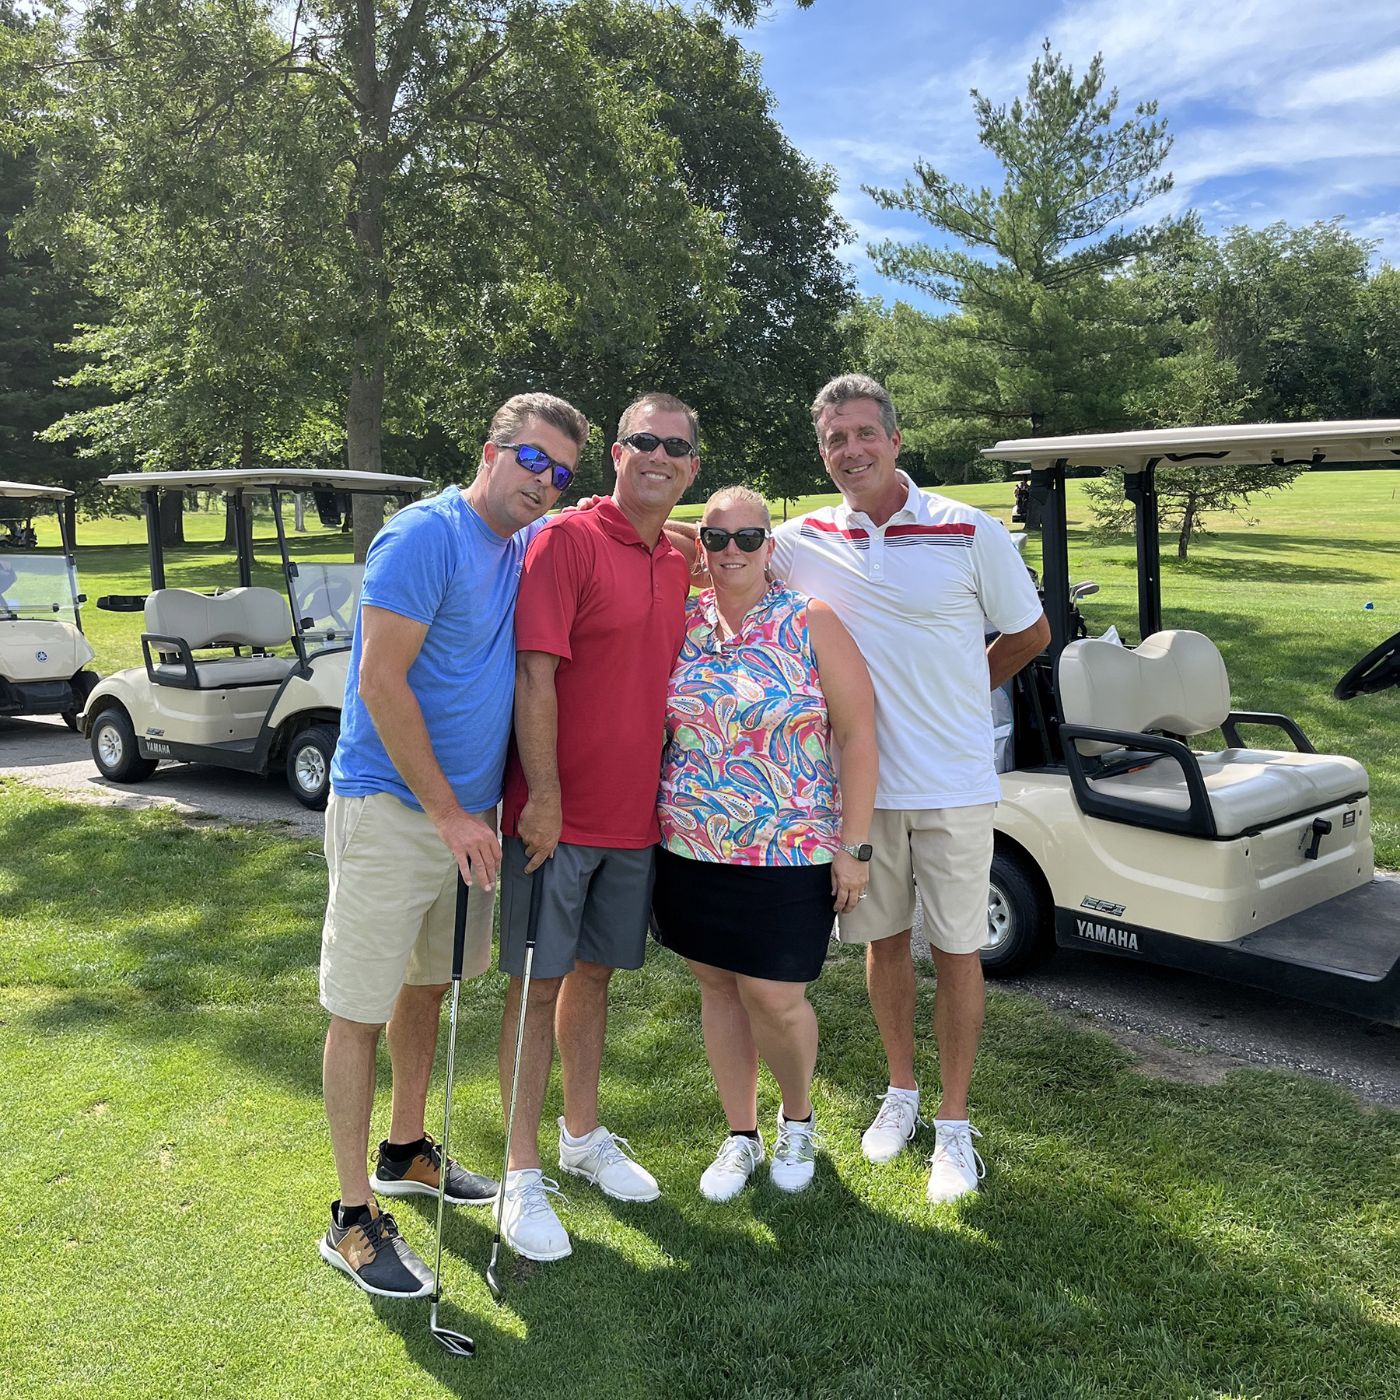 Laborers' 177 Cup Annual Charity Golf Classic